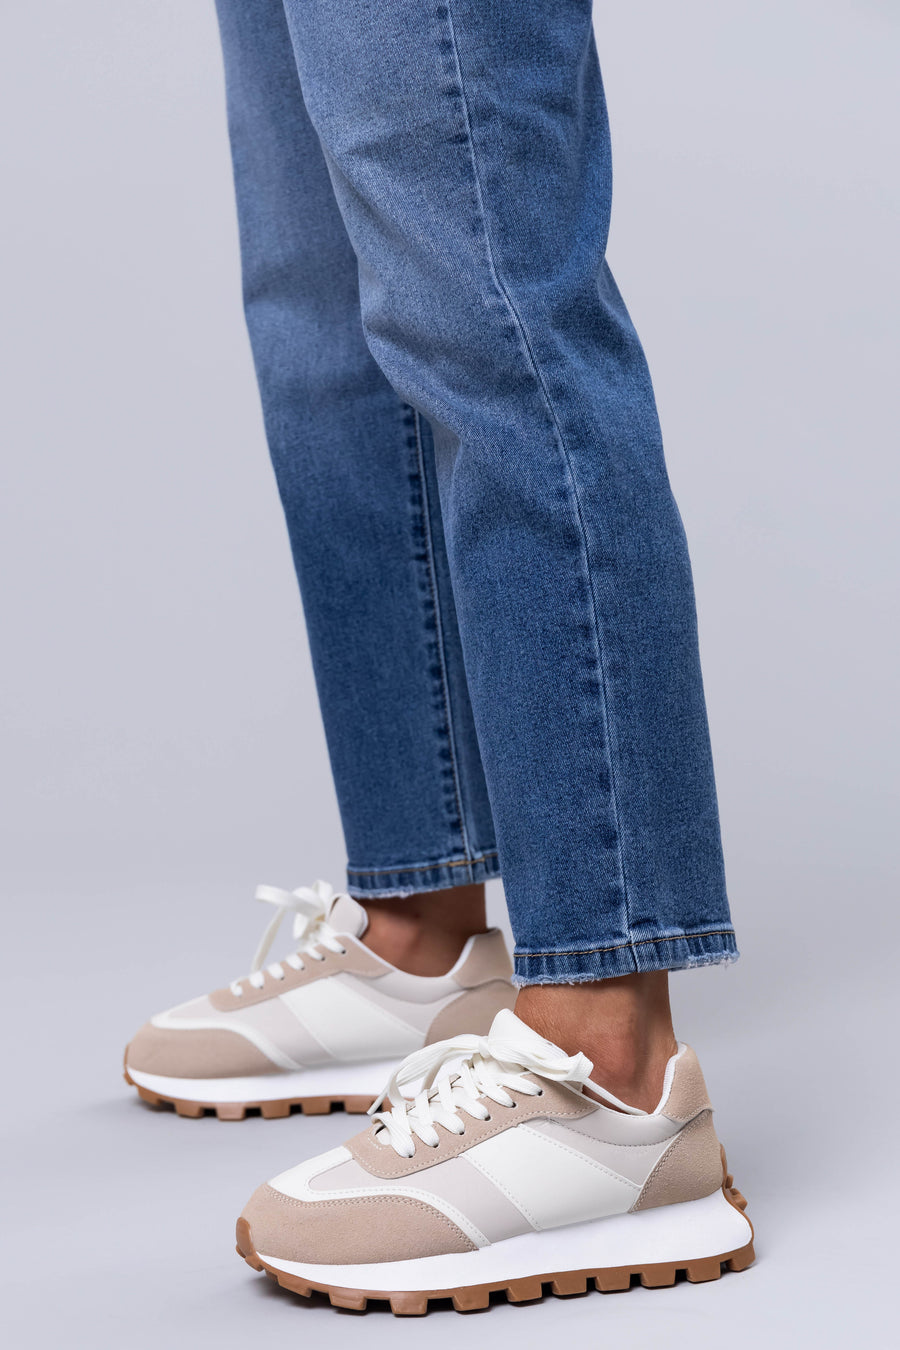 Ivory and Coconut Colorblock Lace Up Sneakers